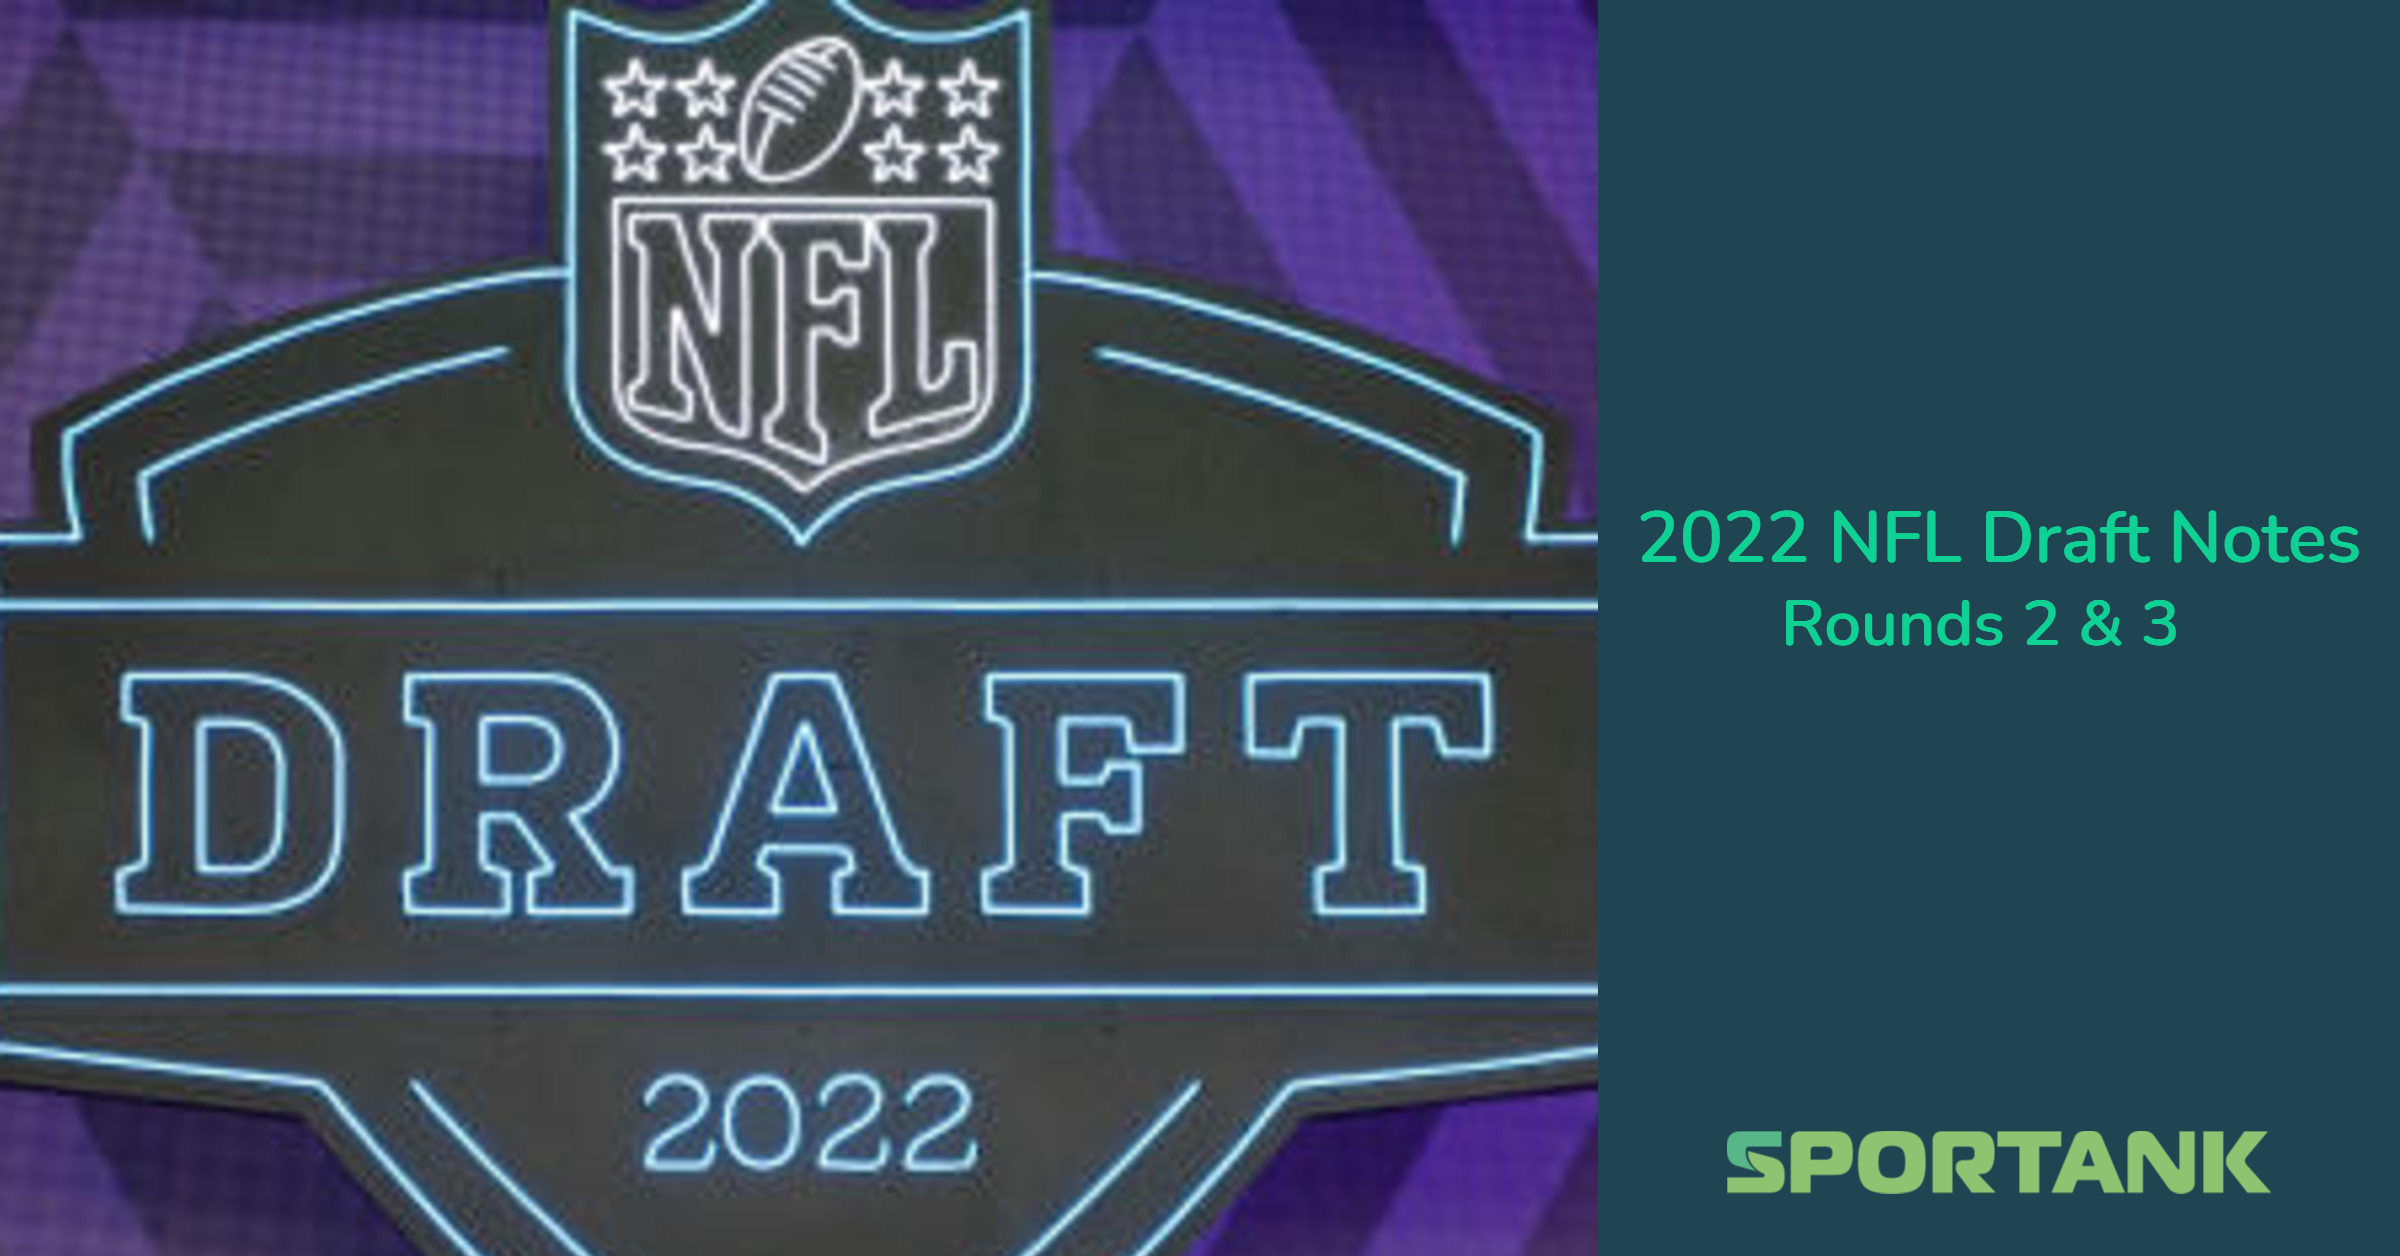 2022 NFL Draft Notes &#8211; Rounds 2 &#038; 3